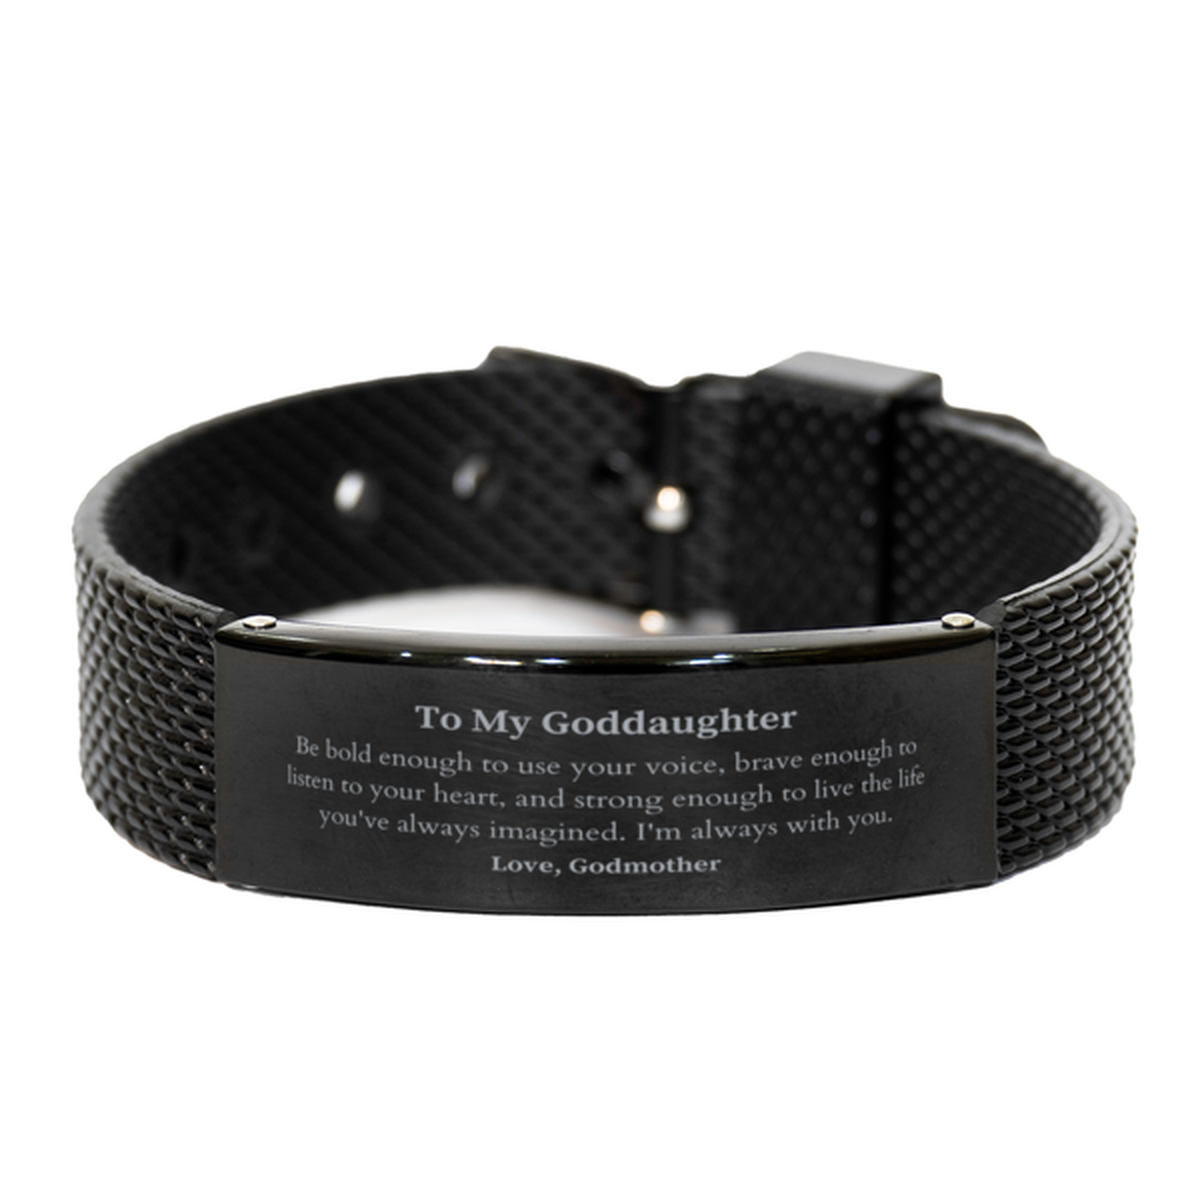 Keepsake Goddaughter Black Shark Mesh Bracelet Gift Idea Graduation Christmas Birthday Goddaughter from Godmother, Goddaughter Be bold enough to use your voice, brave enough to listen to your heart. Love, Godmother